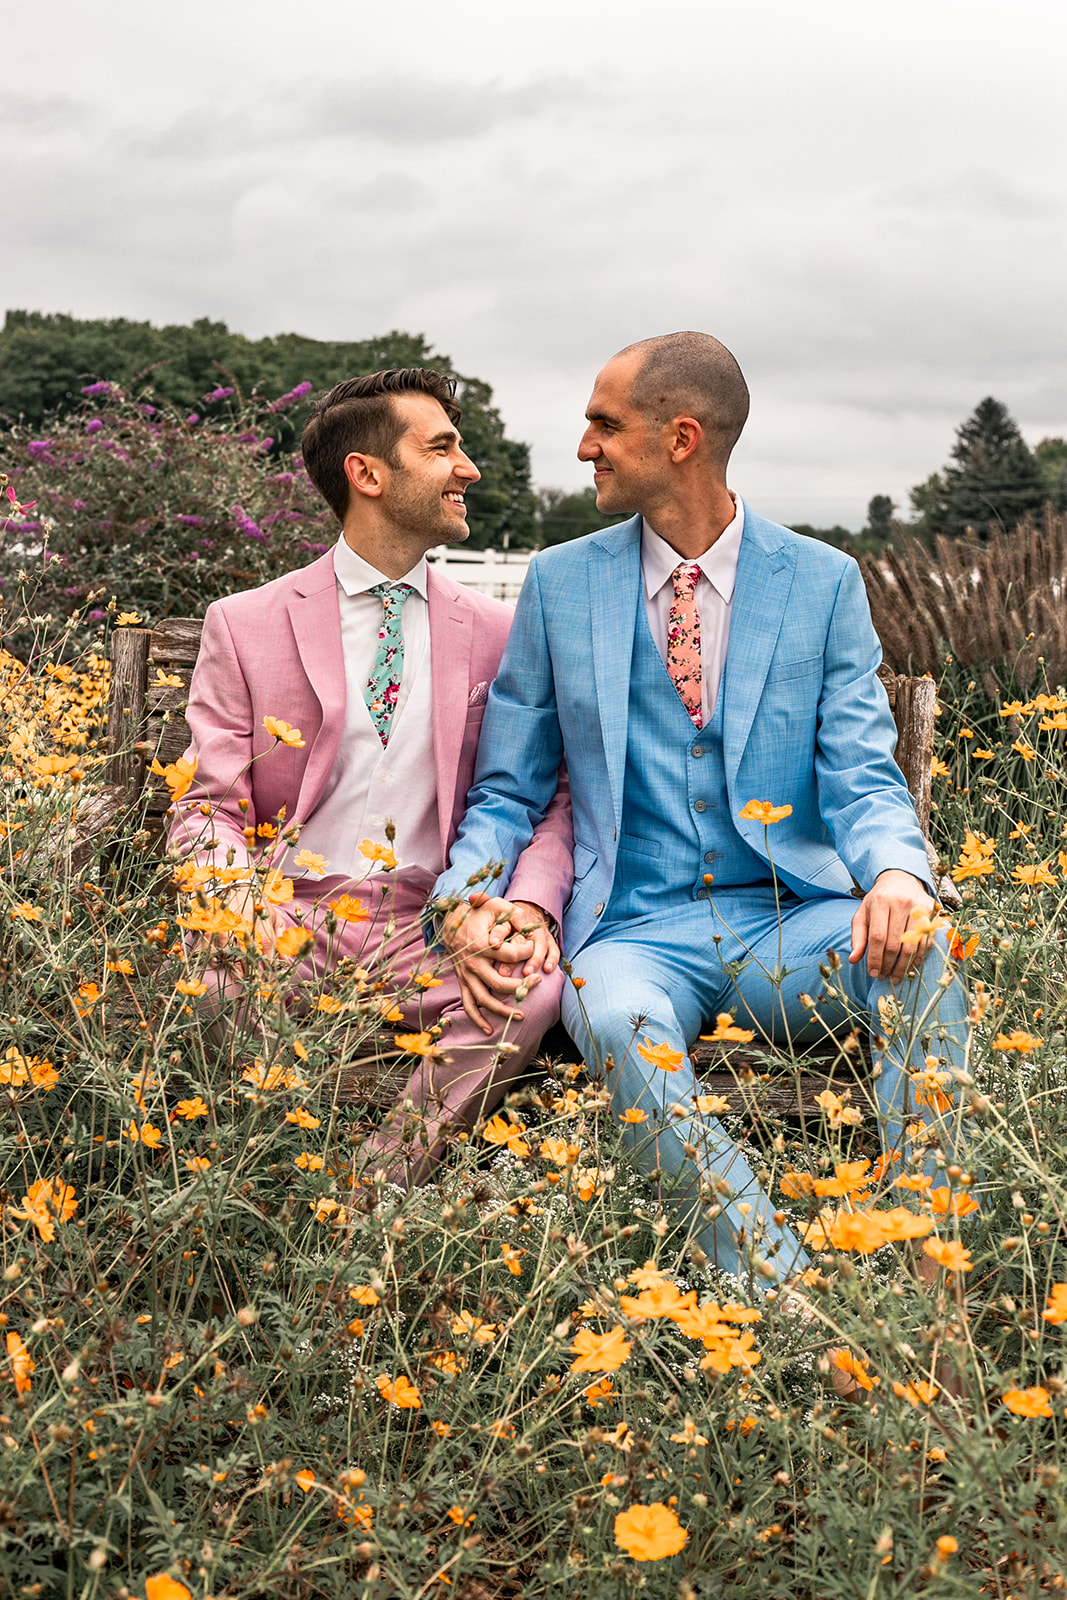 Colin and Kirk in a field of flowers